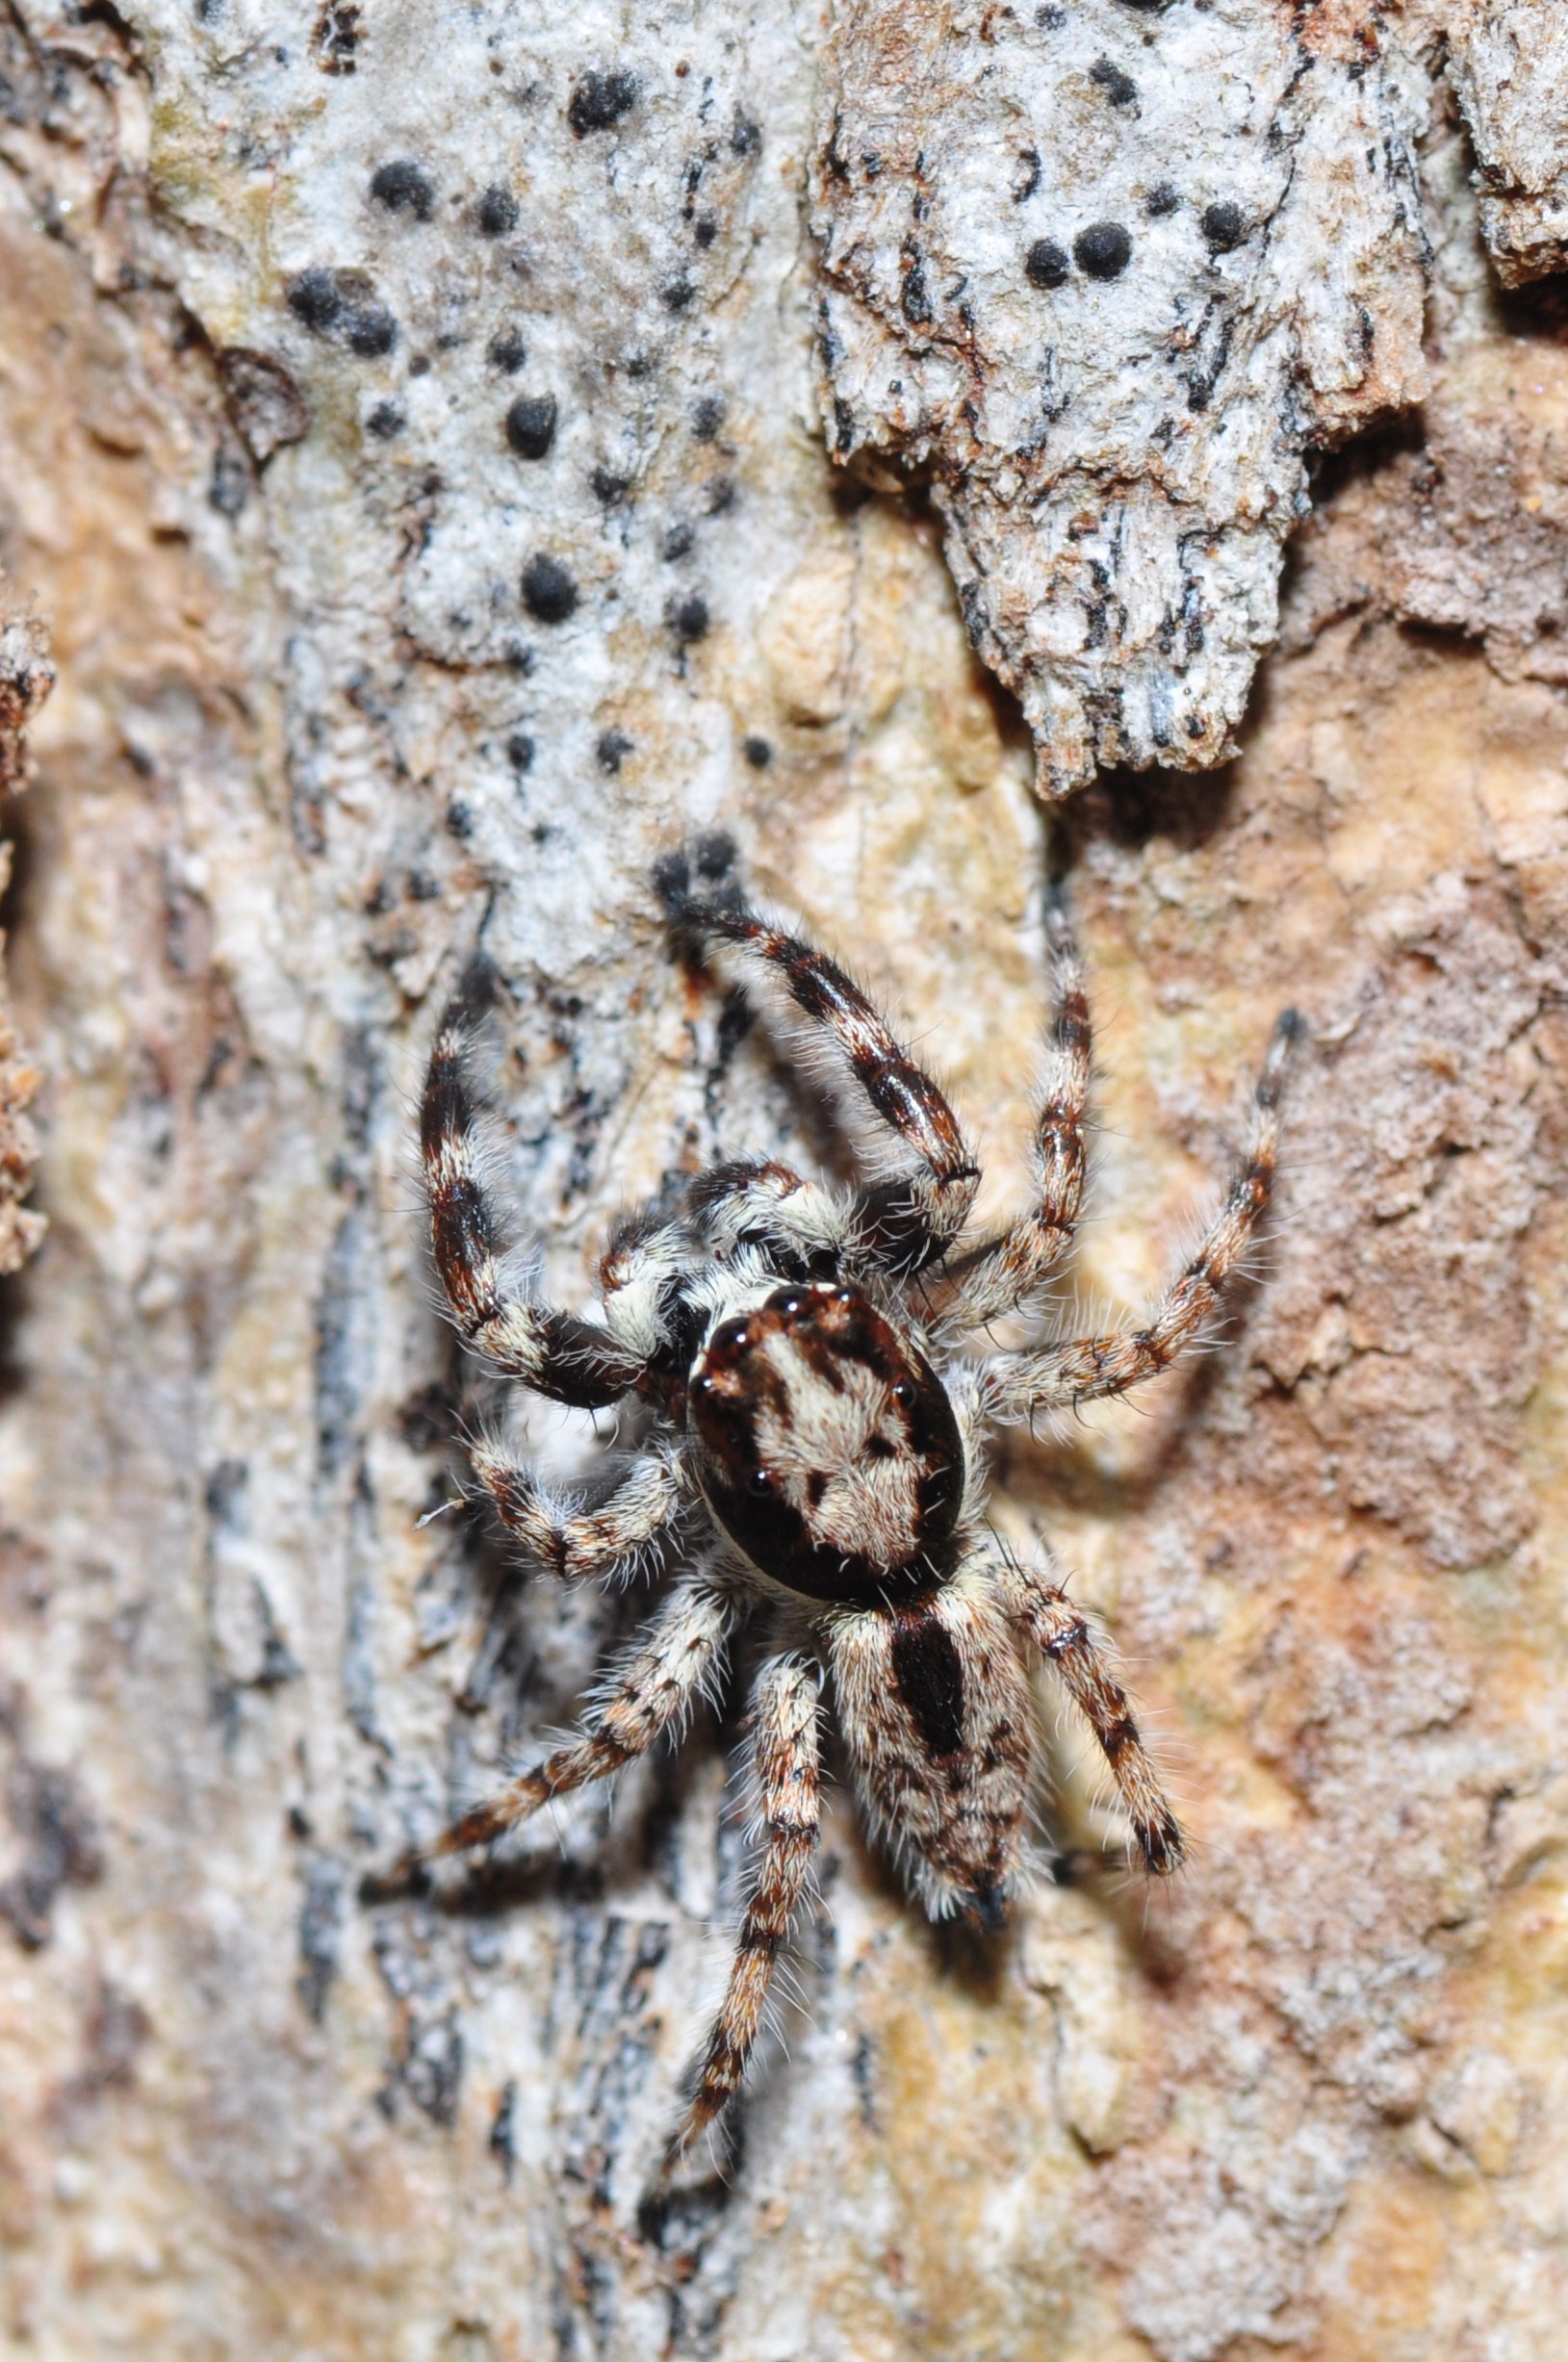 File:Well-camouflaged jumping spider (8445634680).jpg - Wikimedia ...